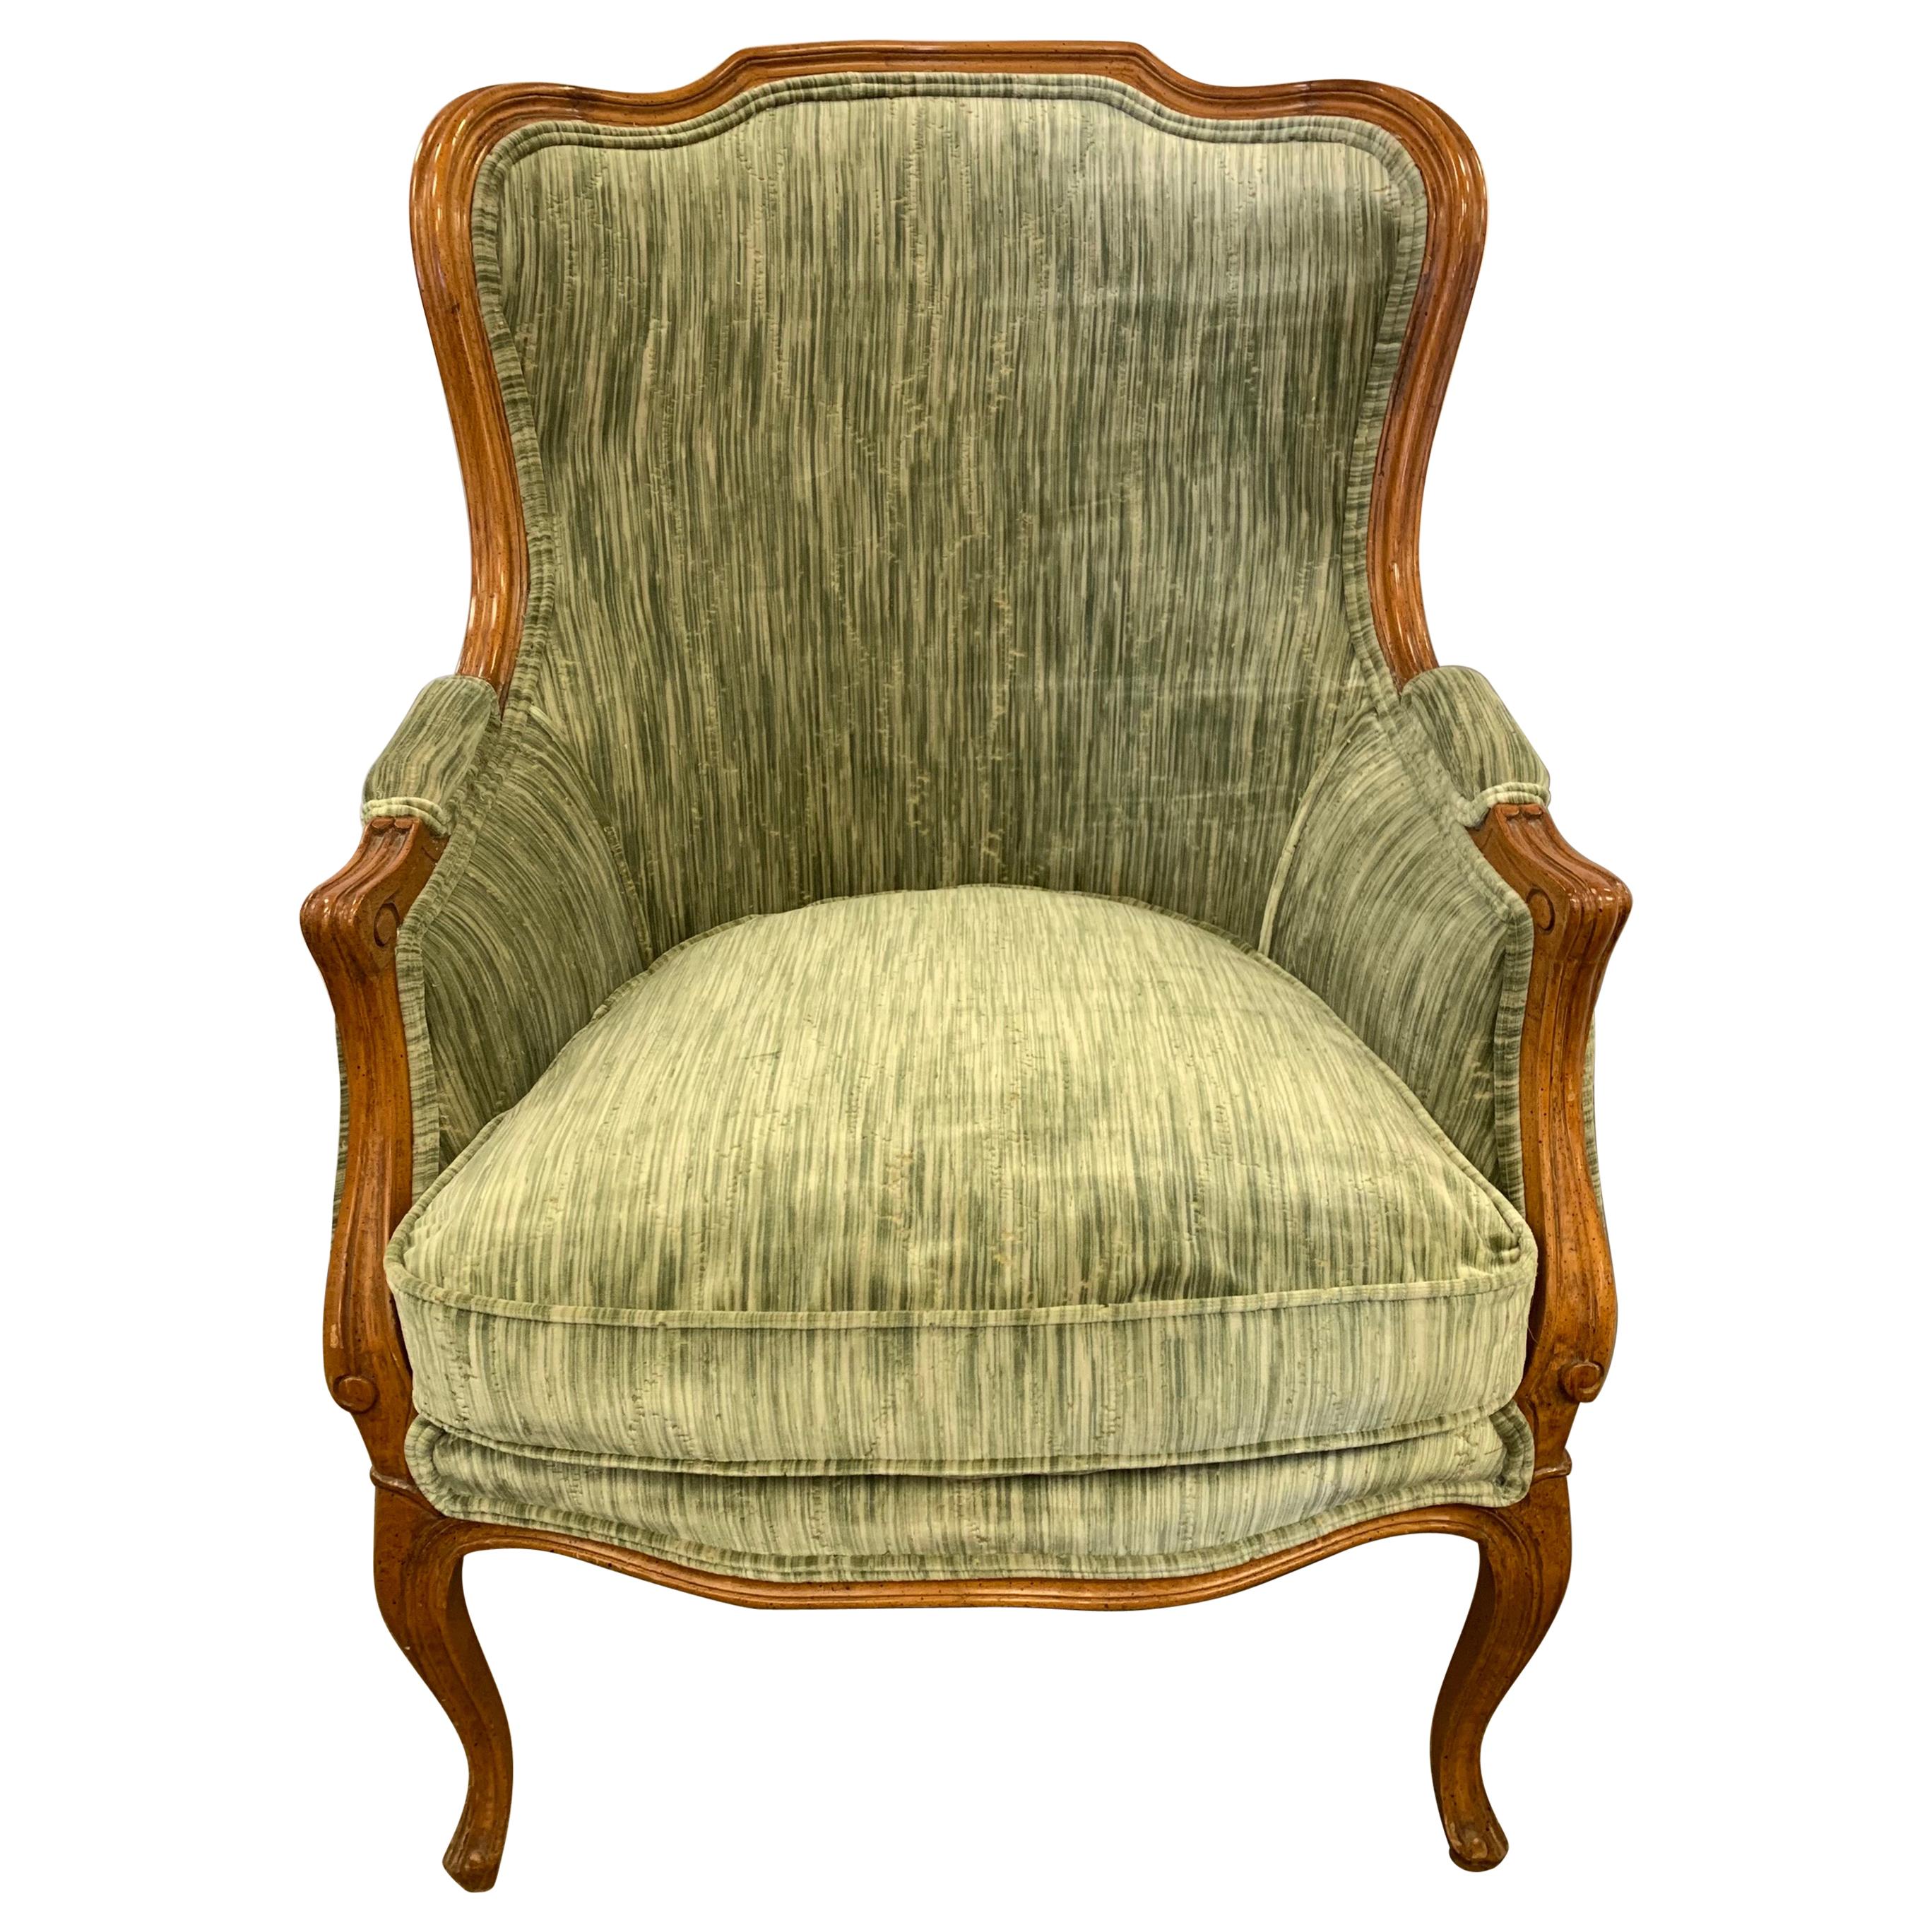 French Bergère Chair Newly Upholstered in Crushed Velvet Clarence House Textile